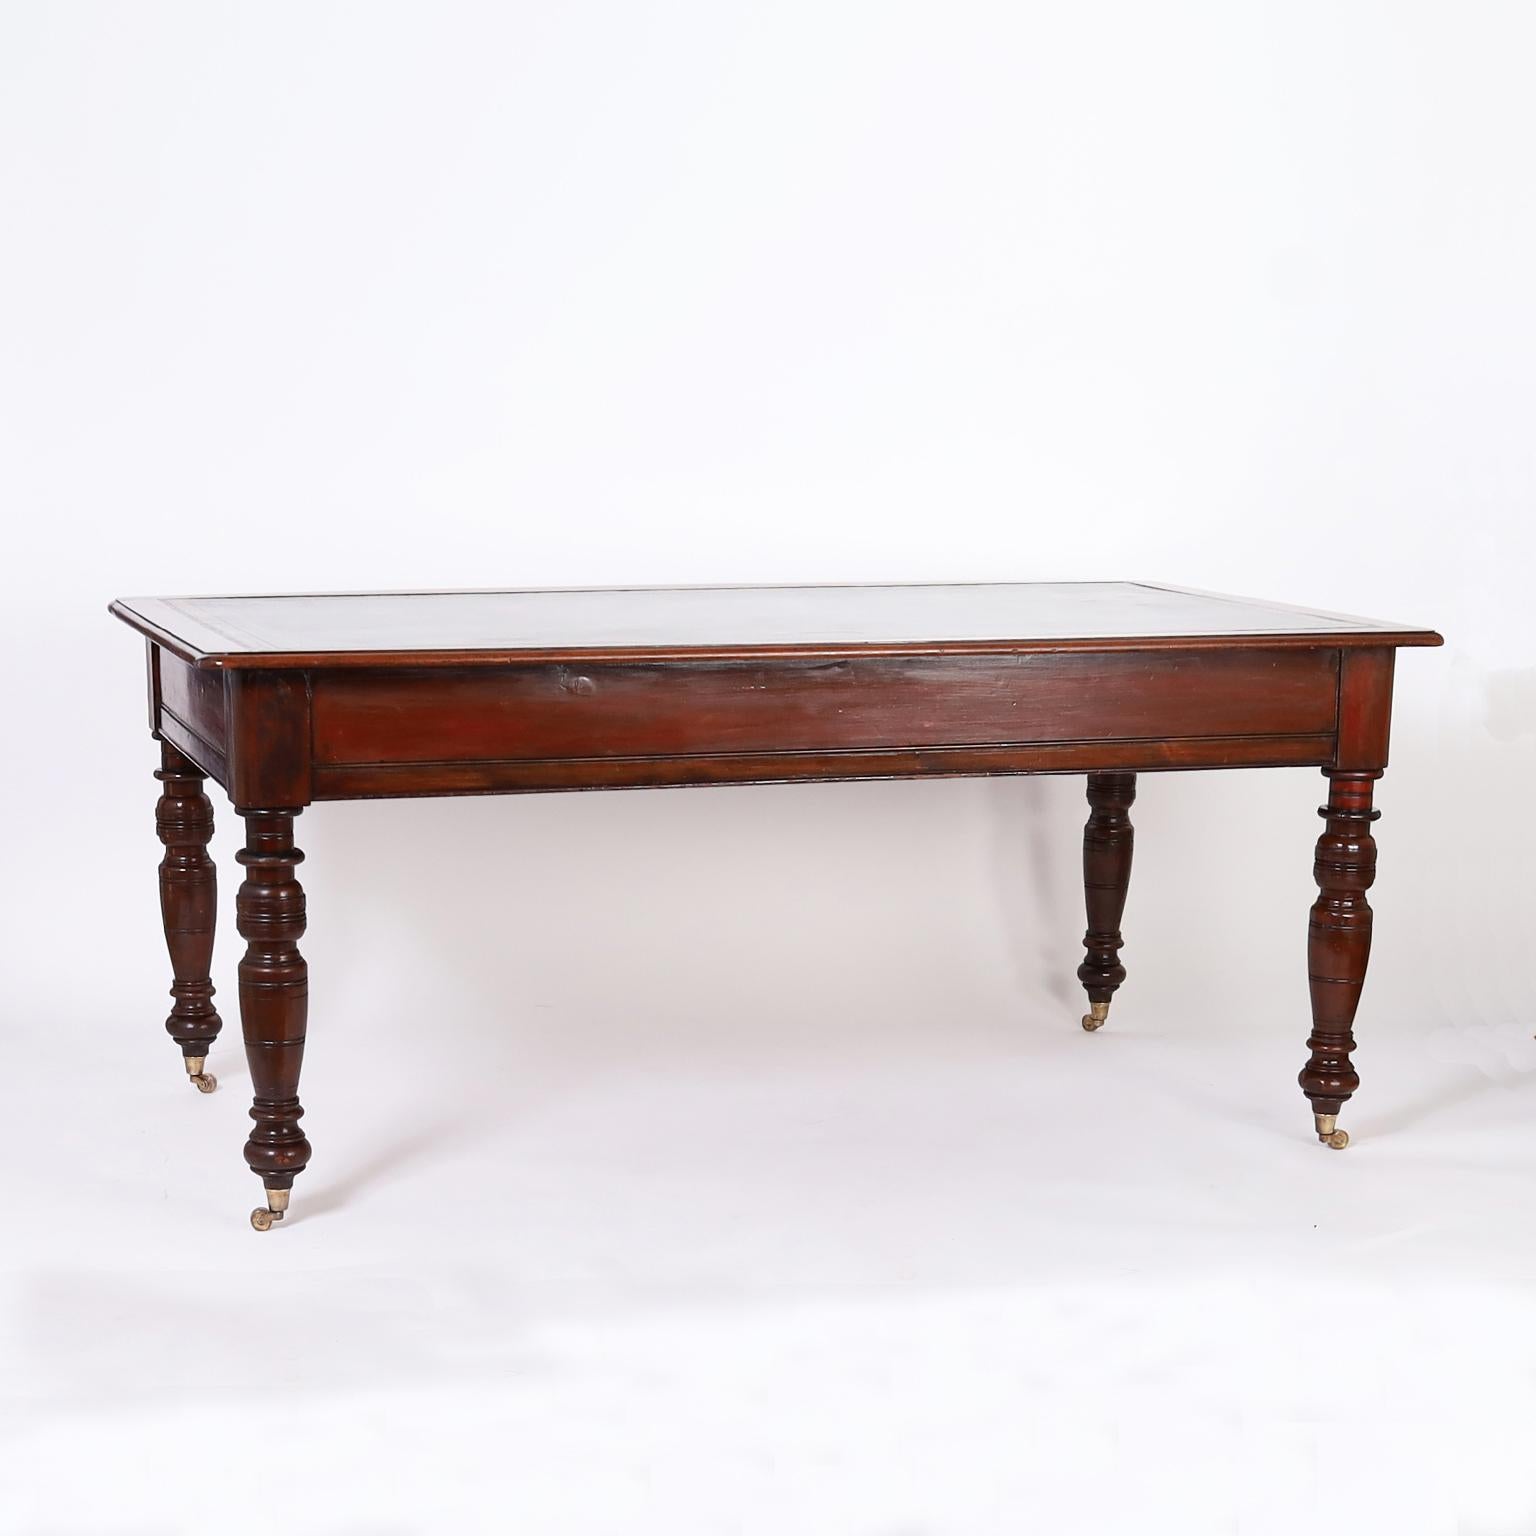 English British Colonia Style Leather Top Desk or Writing Table